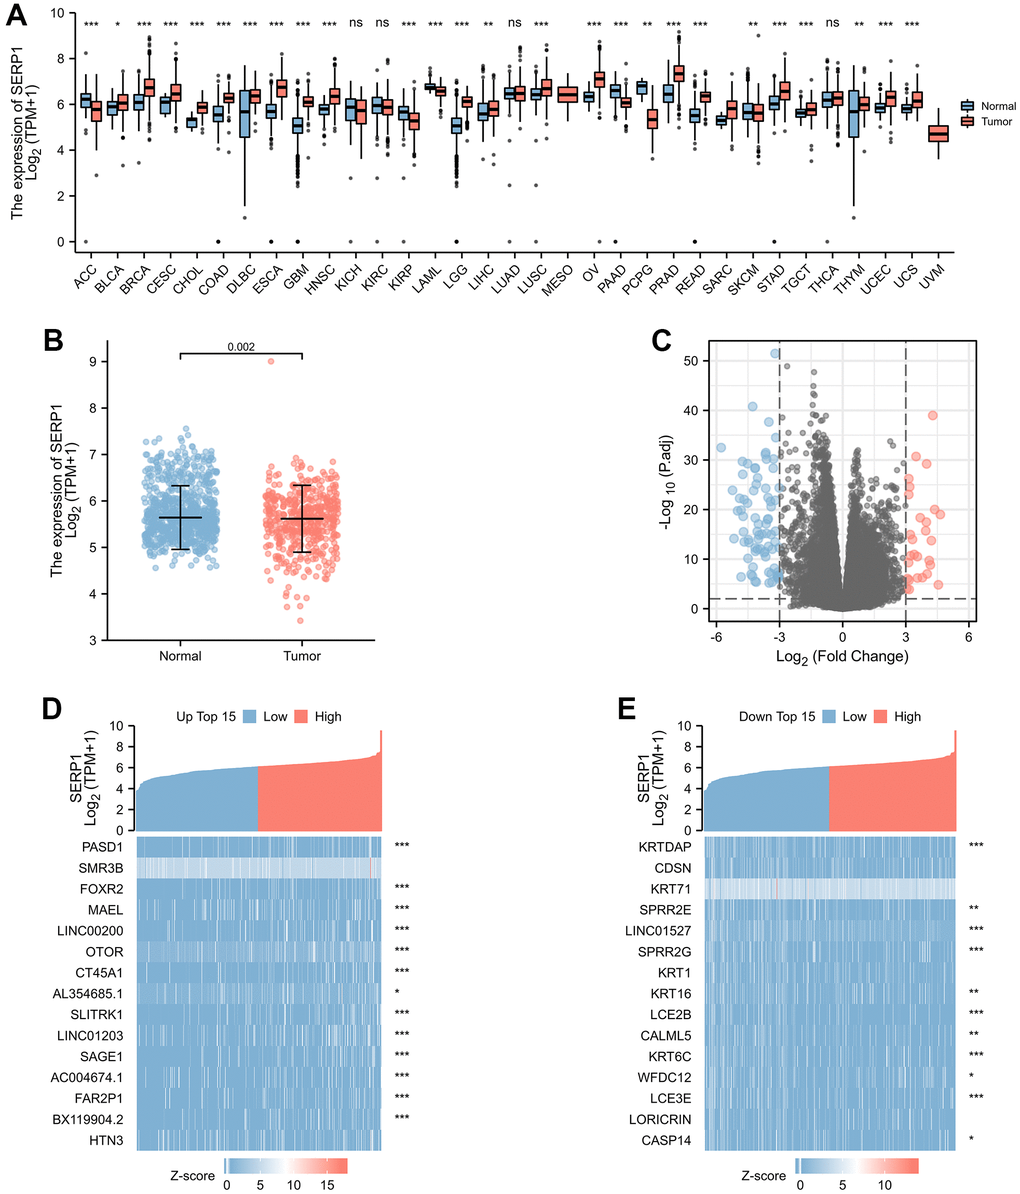 SERP1 expression in cancers. (A) SERP1 expression in different cancers and normal tissues in TCGA and GTEx pan-cancer data, ns, p ≥ 0.05; *p p p B) The SERP1 expression in SKCM and normal tissues, (C) The volcano plots of DEGs between high and low SERP1 expression groups, (D) The heatmap of top 15 up-regulated DEGs, (E) The heatmap of top 15 down-regulated DEGs.